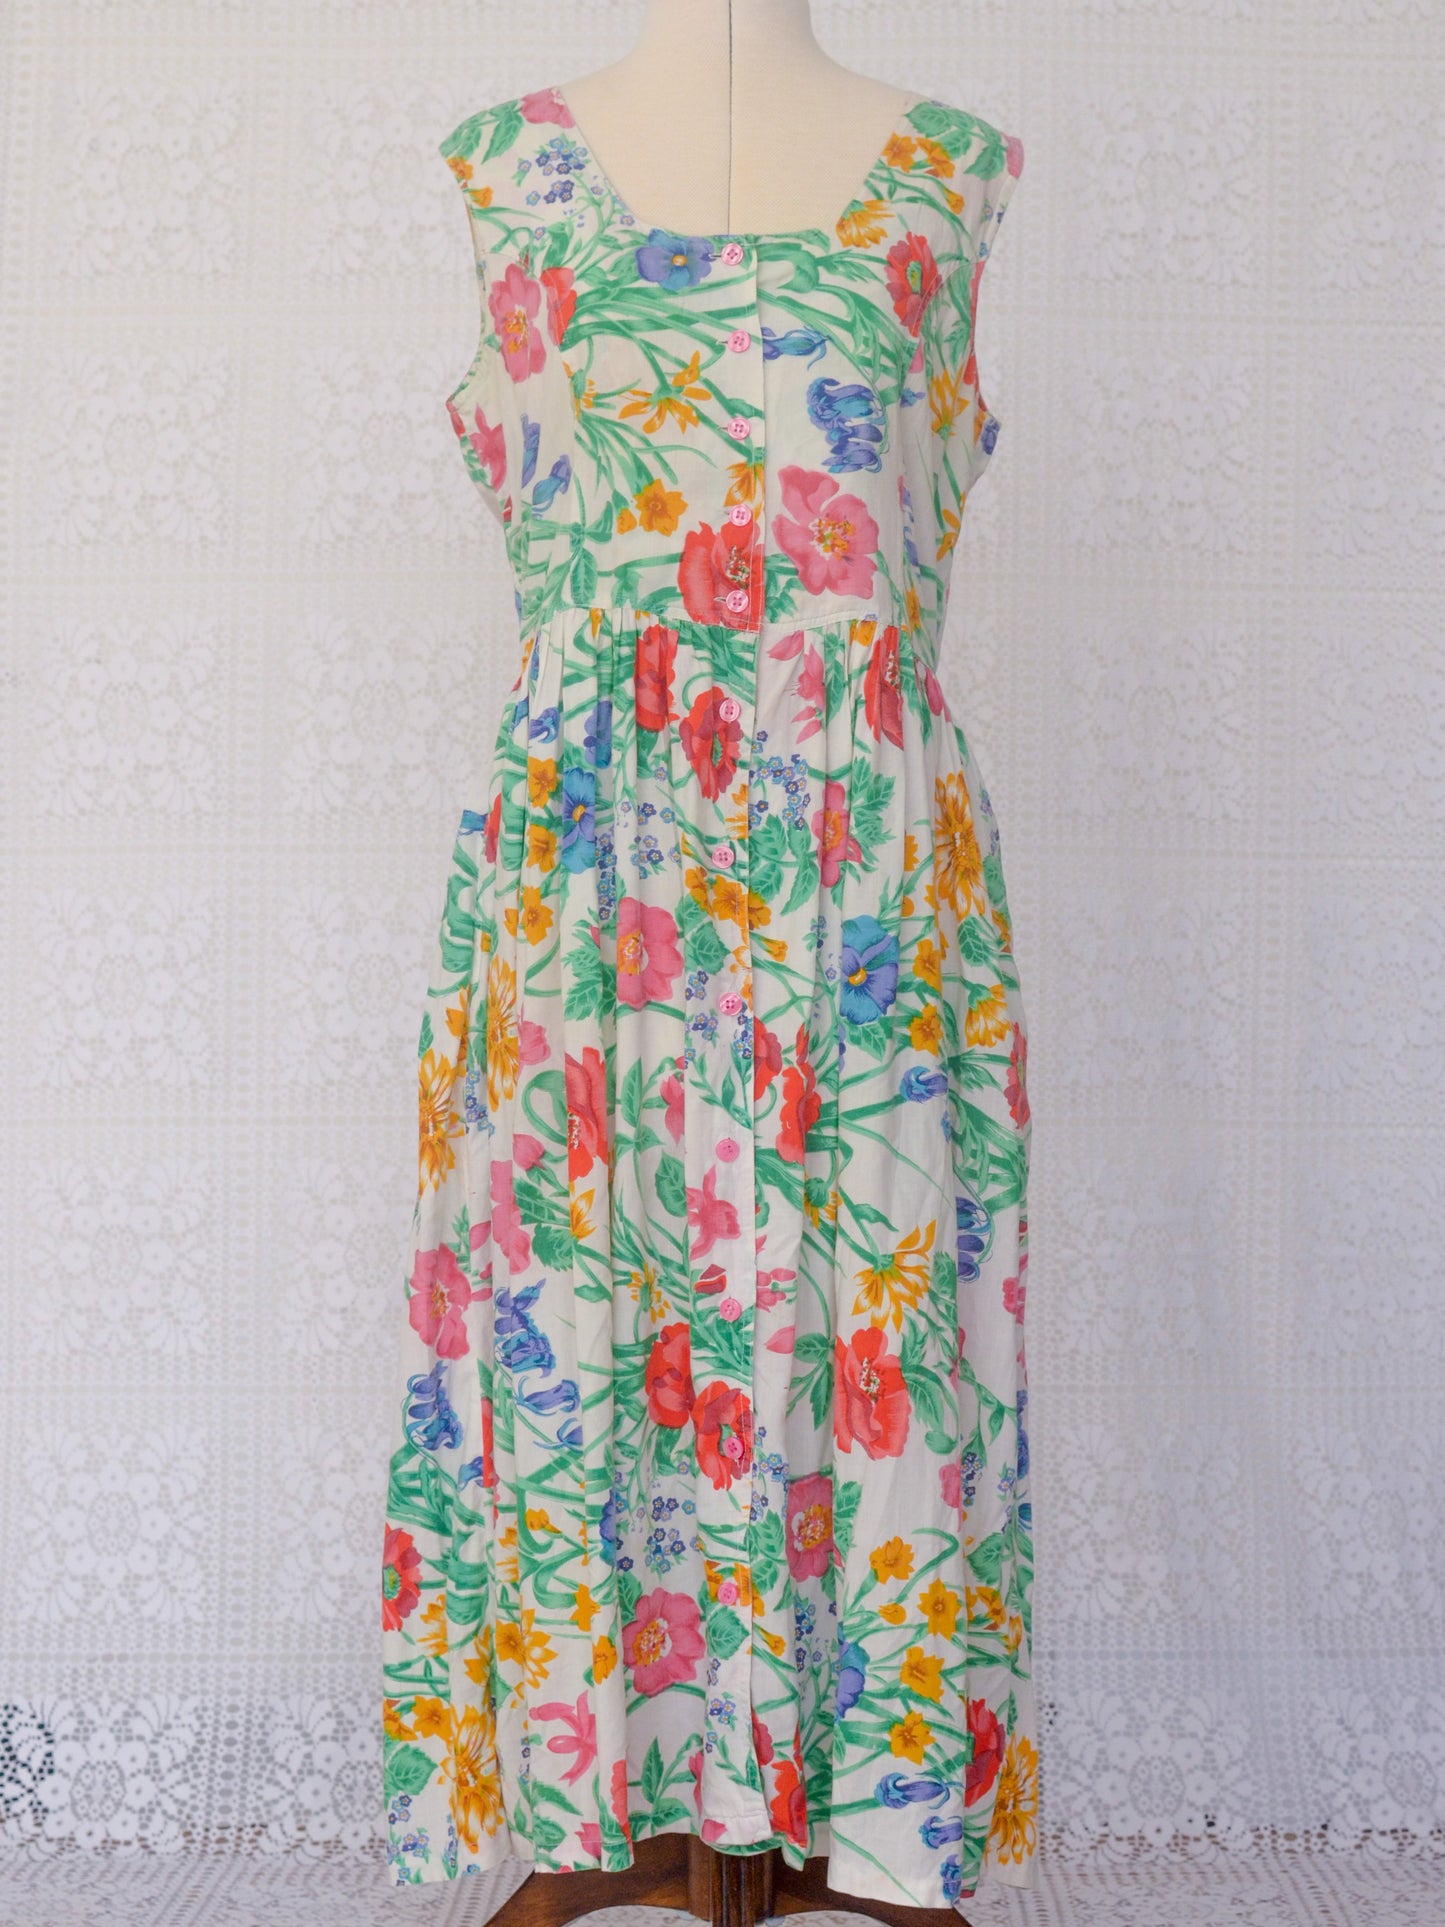 1990s style floral cross back maxi dress